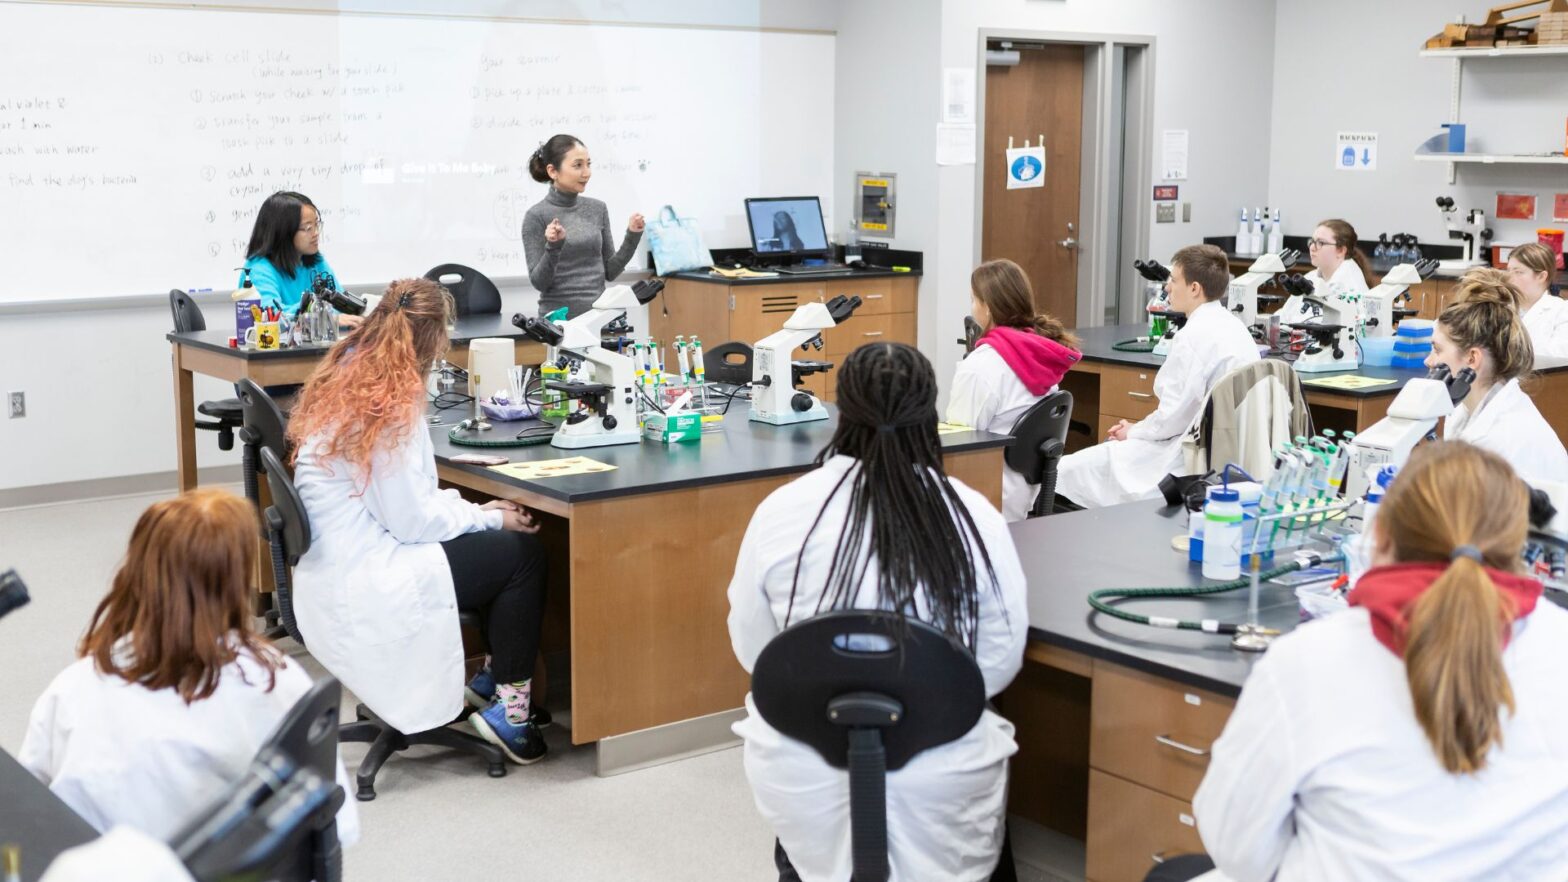 Newman professor Tomoko Bell teaches high school students wearing white lab coats in the Bishop Gerber Science Center.